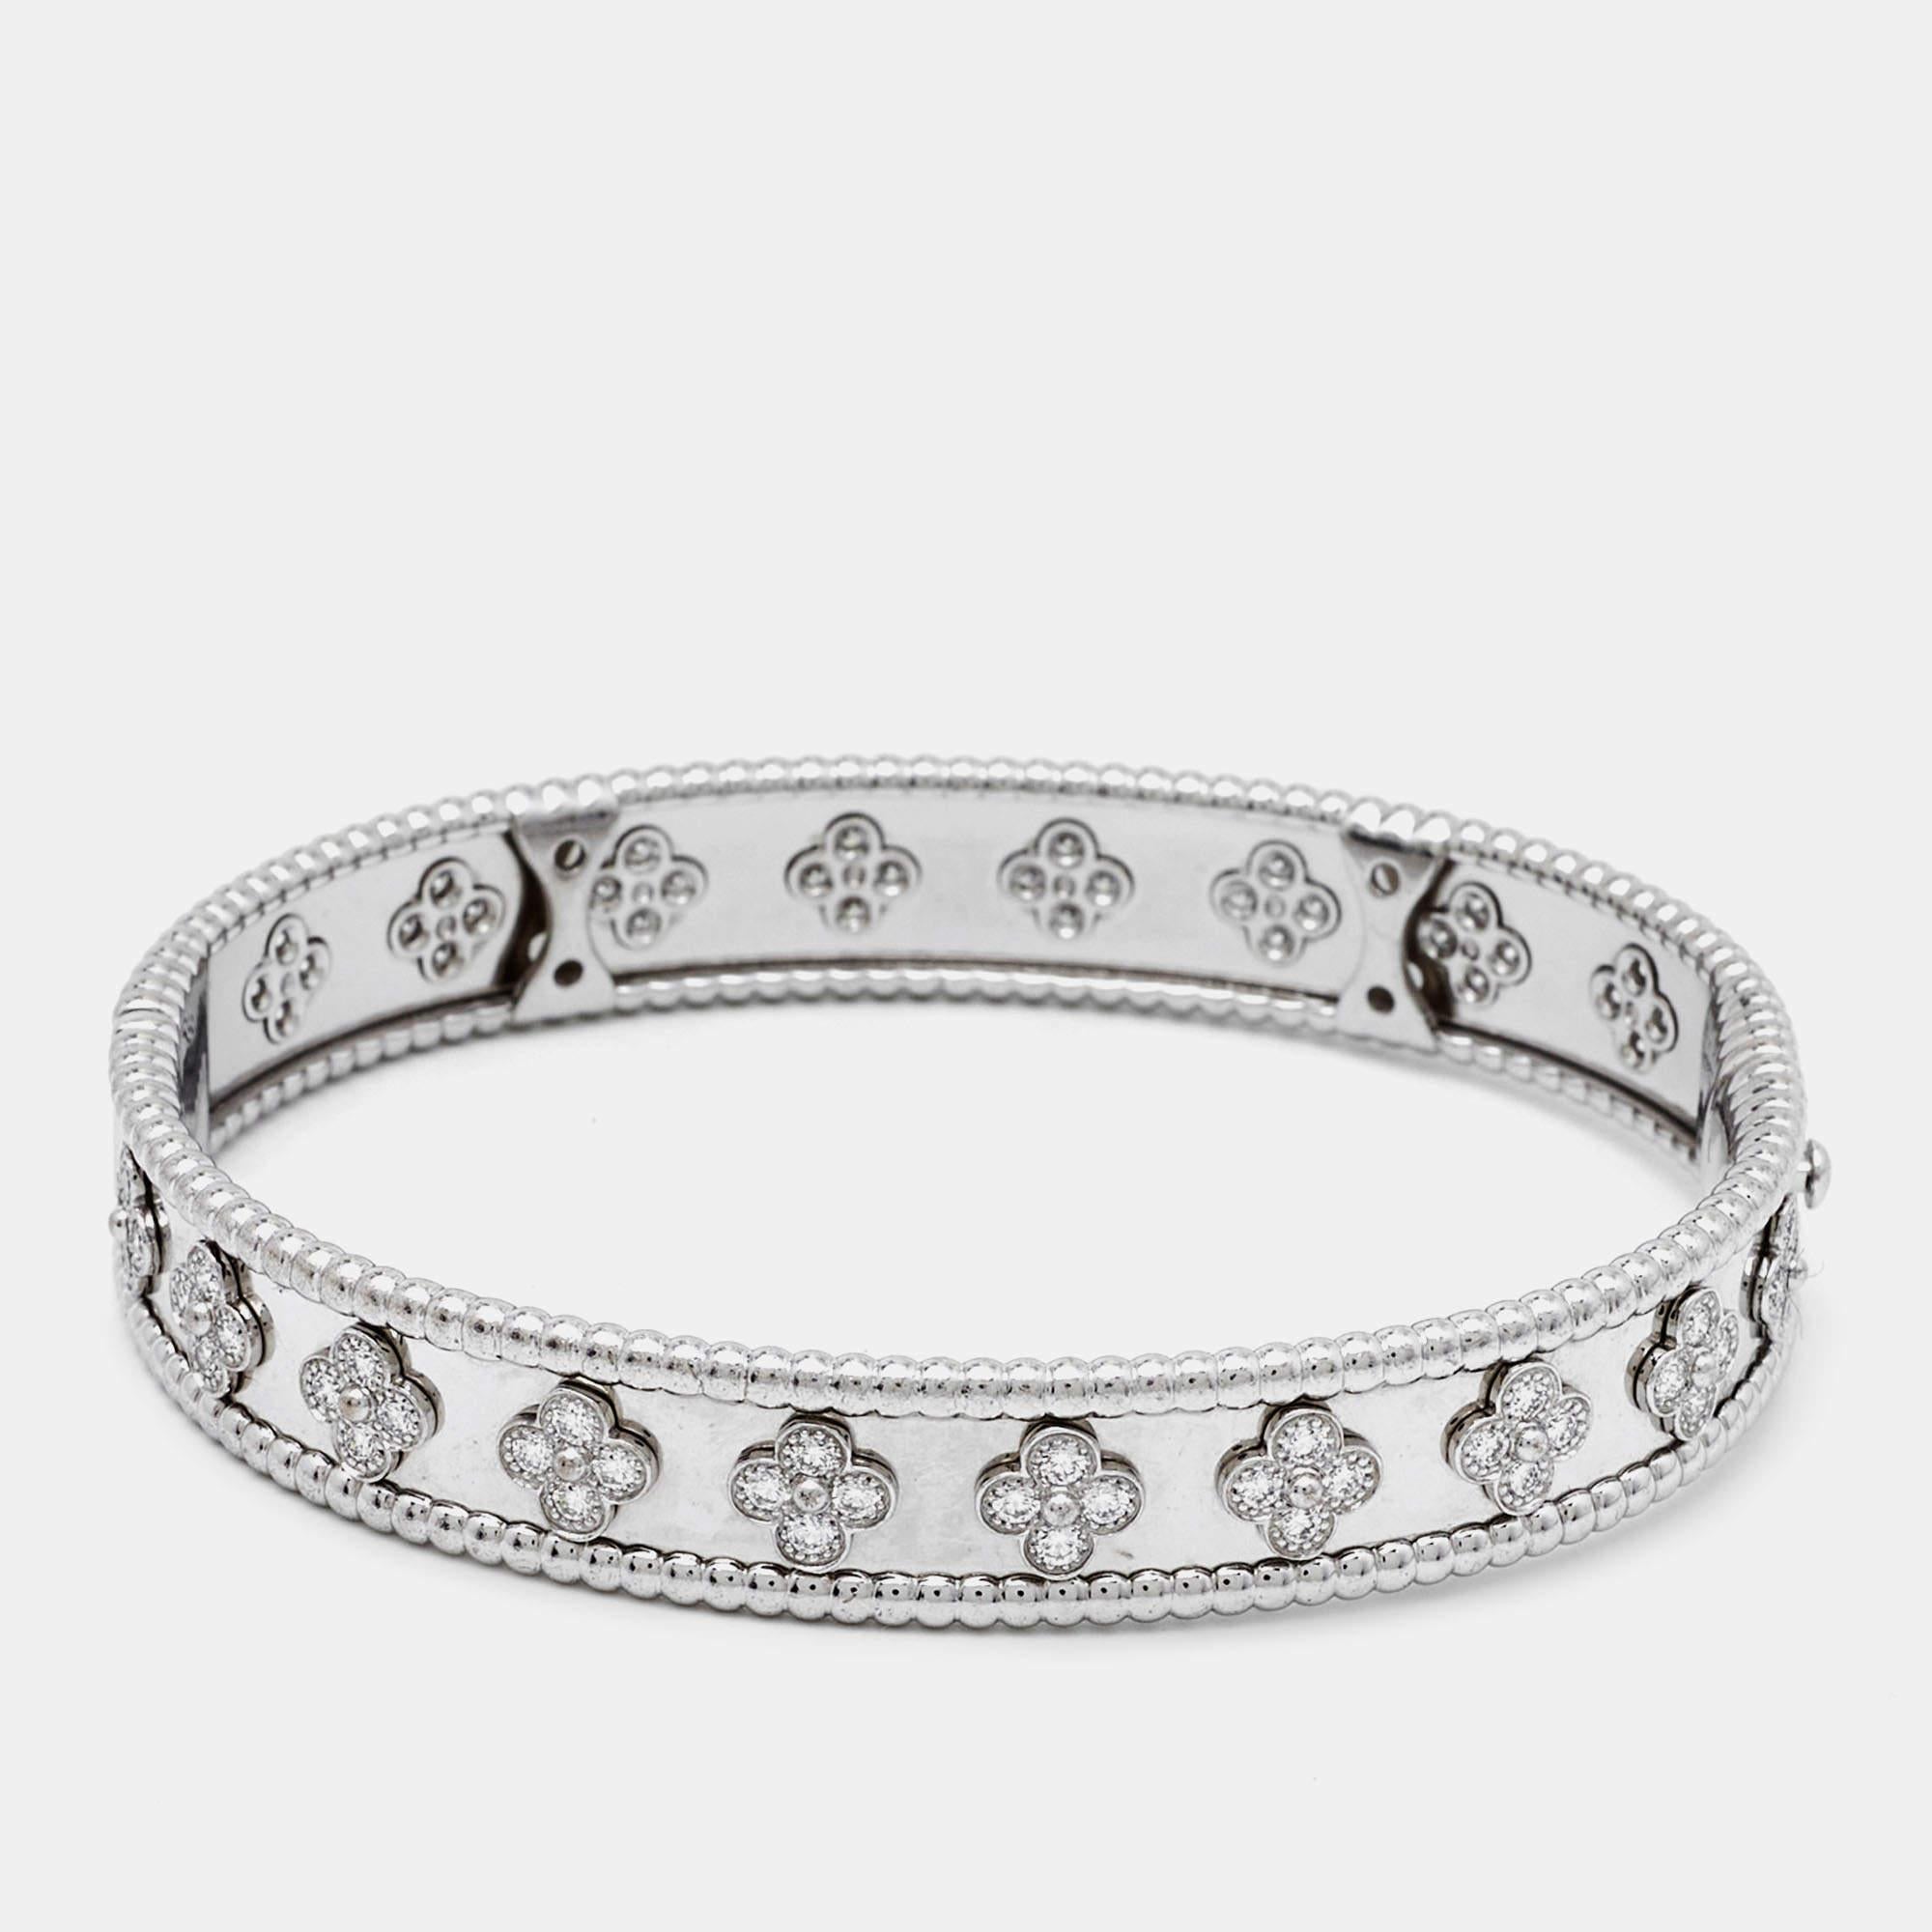 This designer bracelet comes sculpted from 18k white gold and is highlighted by shimmering diamonds. Smoothly finished, the desirable creation deserves to be on your wrist.

